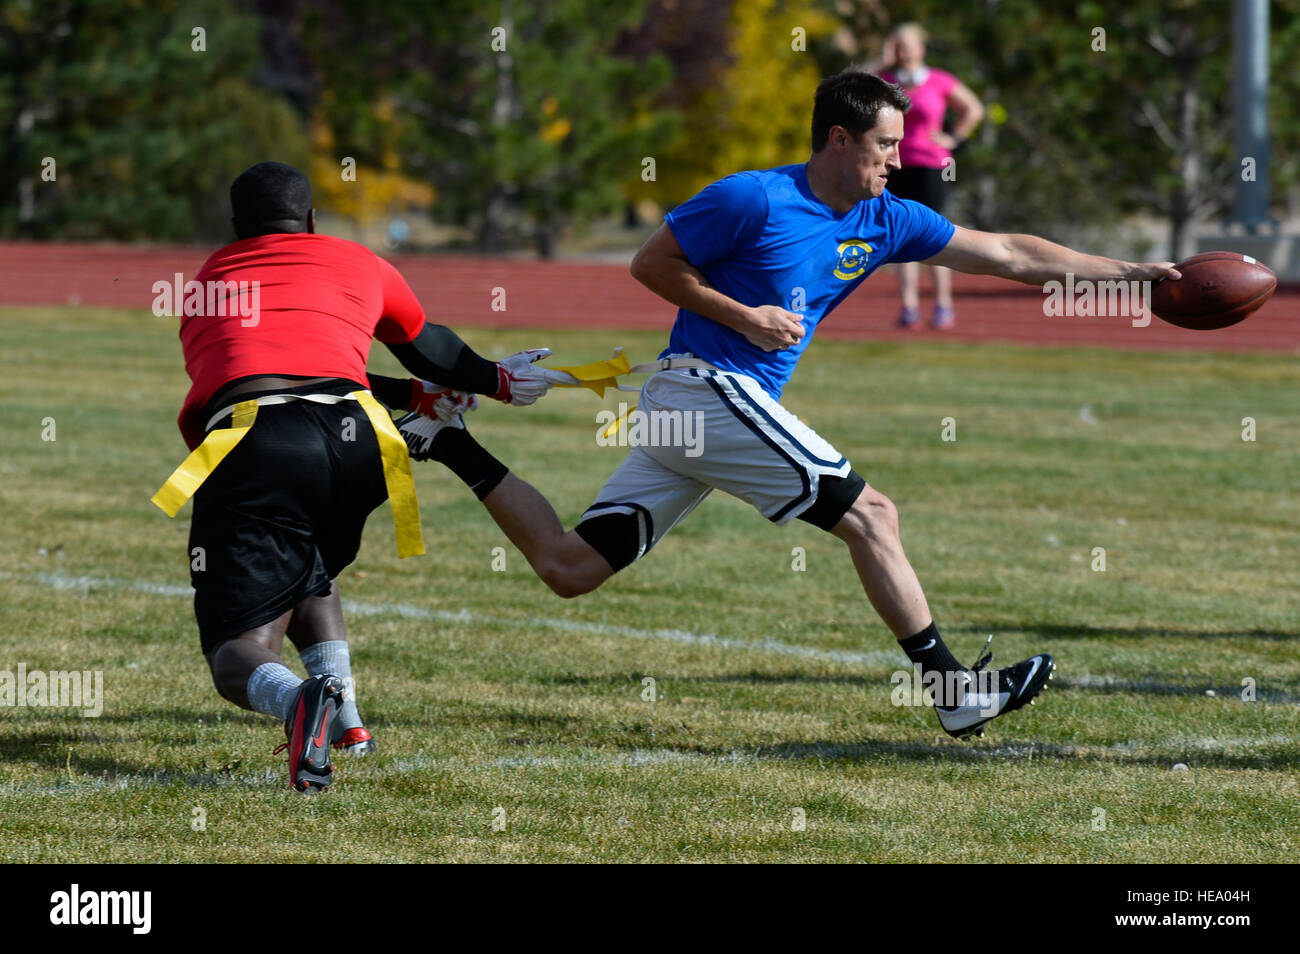 SCHRIEVER AIR FORCE BASE, Colo. -- Josh Print, 1st Space Operations Squadron, scrambles past defenders just before his flag is pulled during the intramural flag football championship game at Schriever Air Force Base, Colorado, Thursday, Oct. 13, 2016. Print accounted for all five 1 SOPS touchdowns, one rushing and four passing, to lead his team to a 35-18 victory over the 3rd Space Operations Squadron. Christopher DeWitt) Christopher DeWitt) Stock Photo